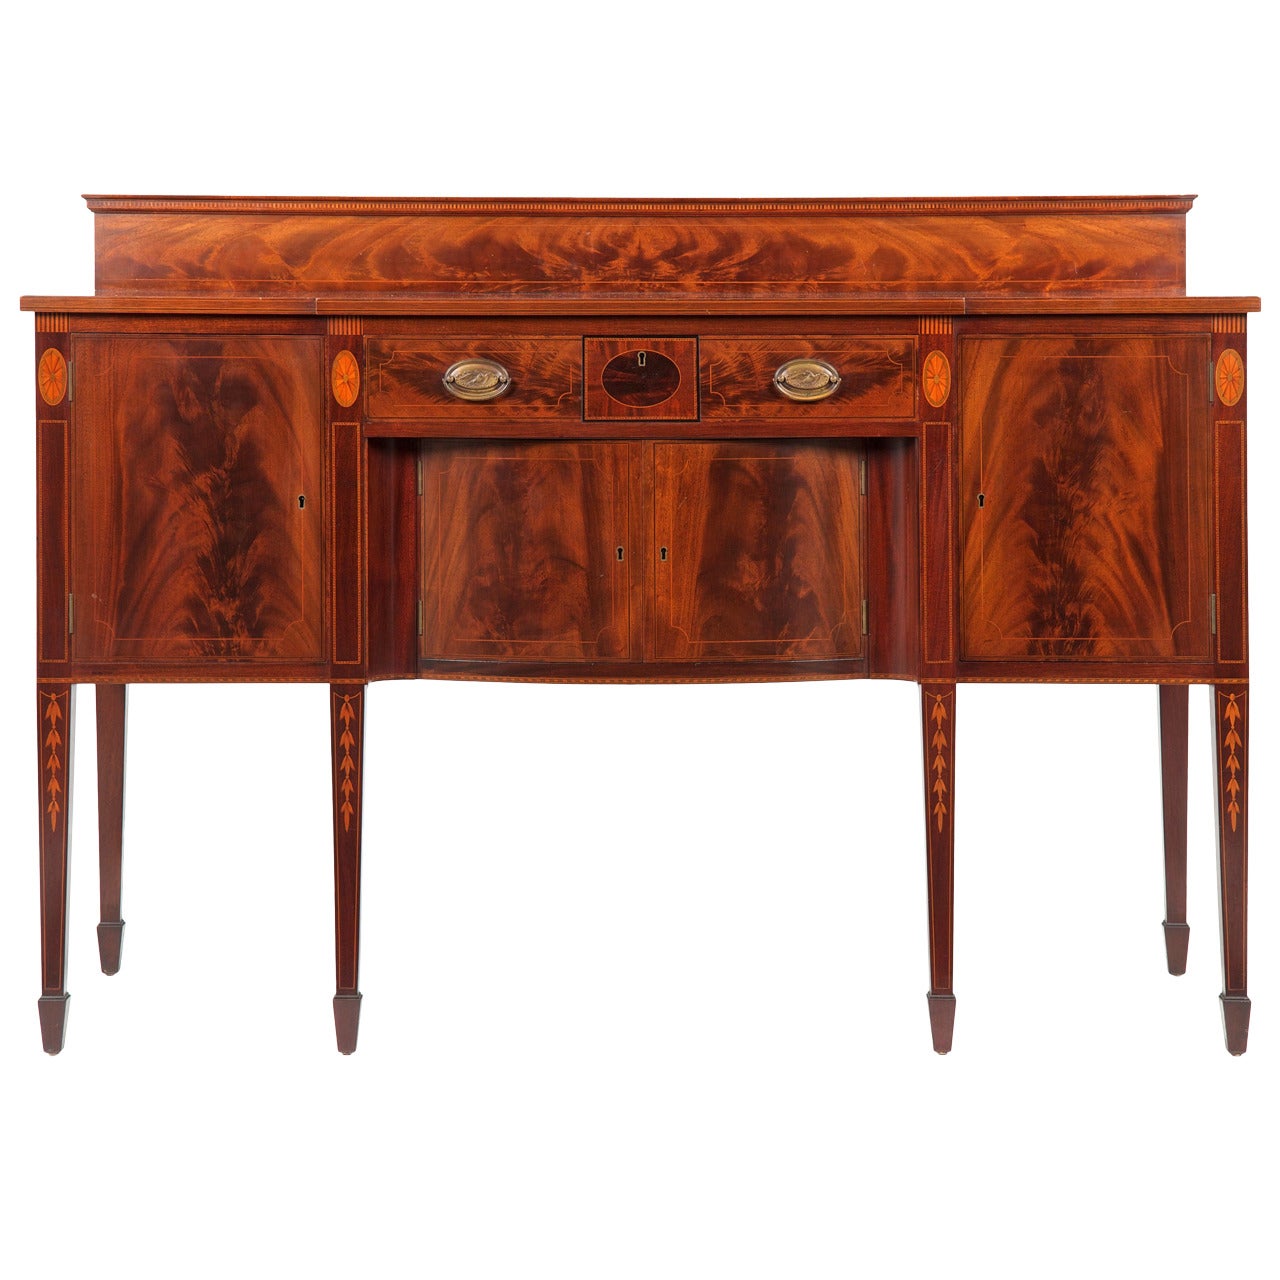 Potthast Brothers American Federal Style Mahogany Sideboard